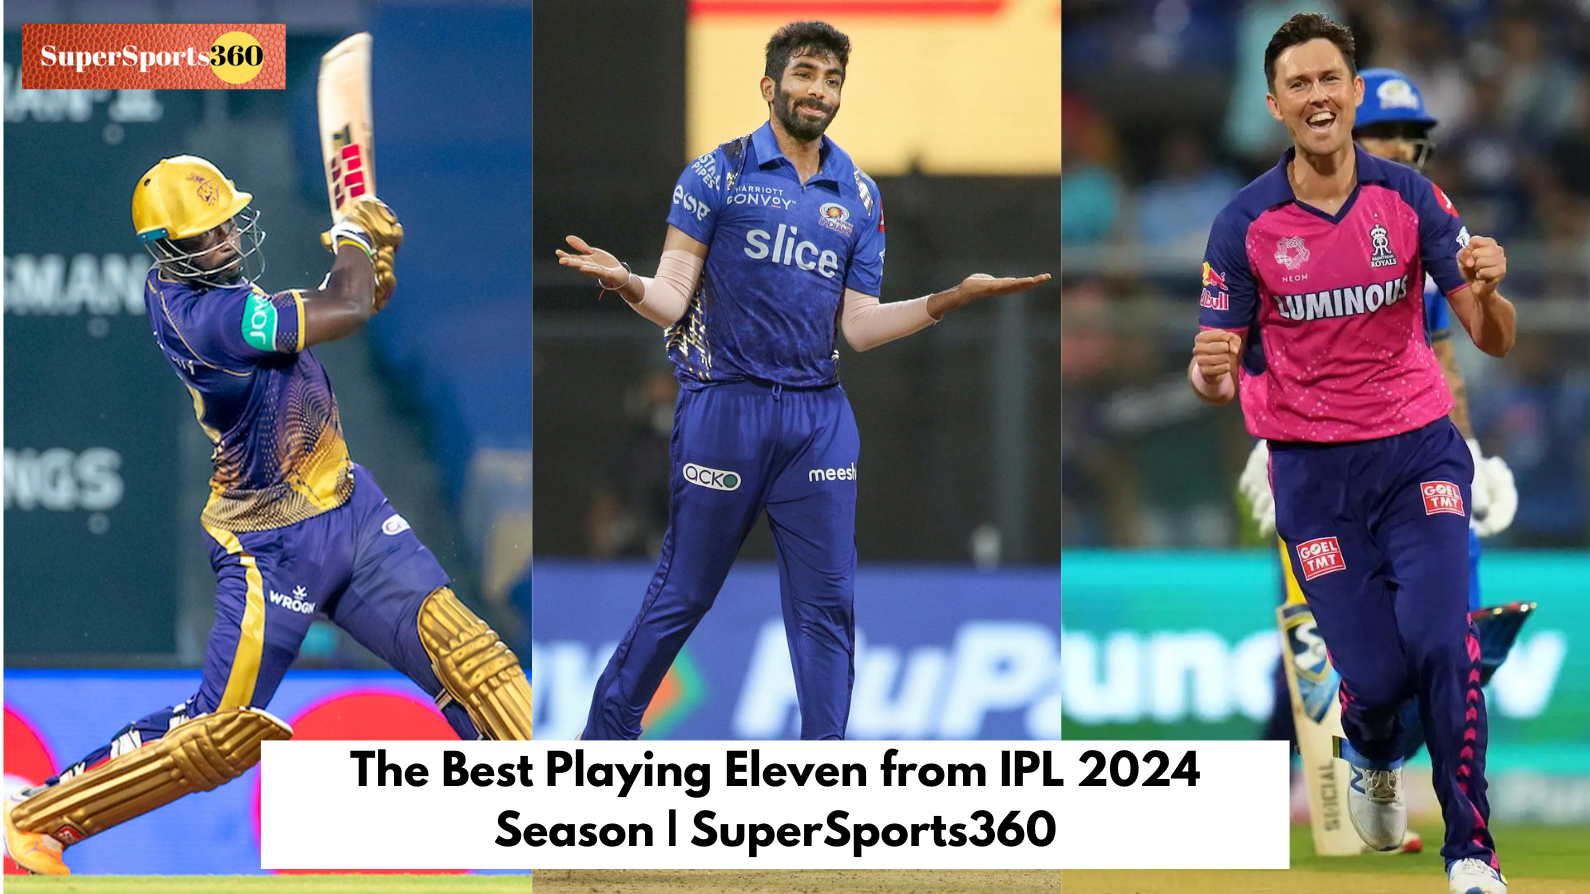 The Best Playing Eleven from IPL 2024 Season | SuperSports360